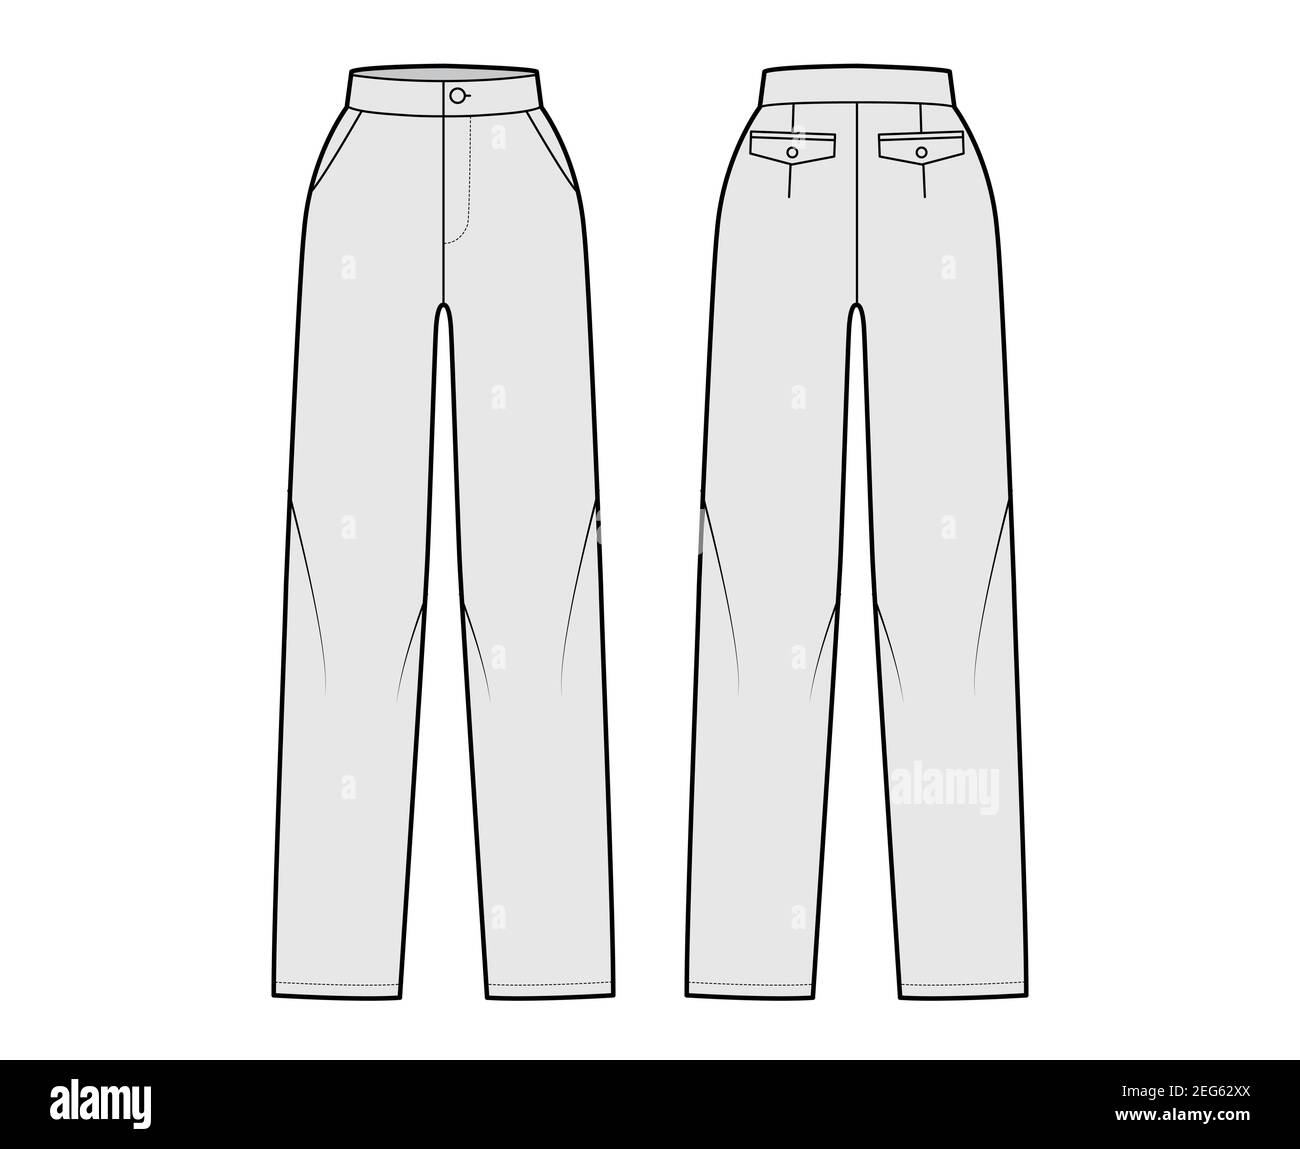 Pants straight technical fashion illustration with flat front, normal ...